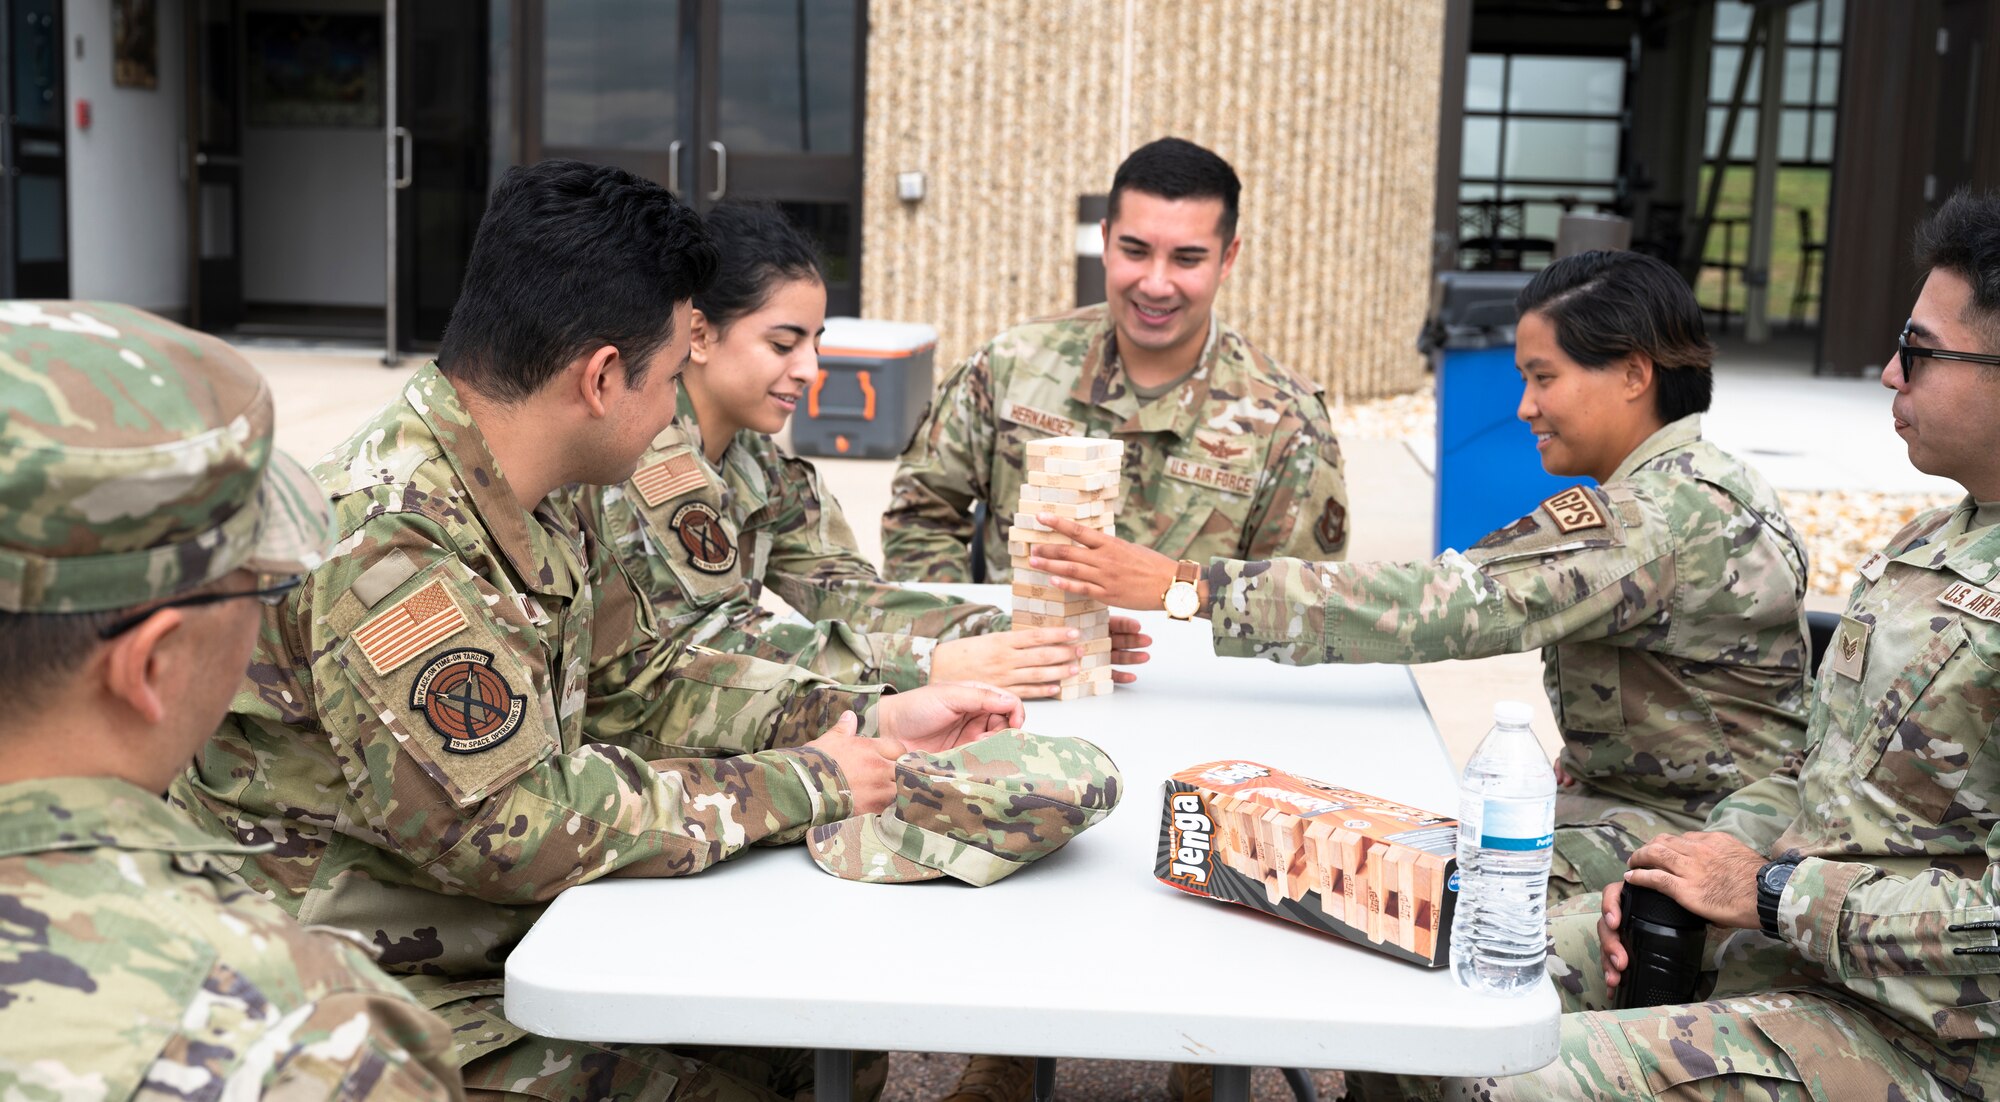 People in military uniforms sitting at a table playing board games.